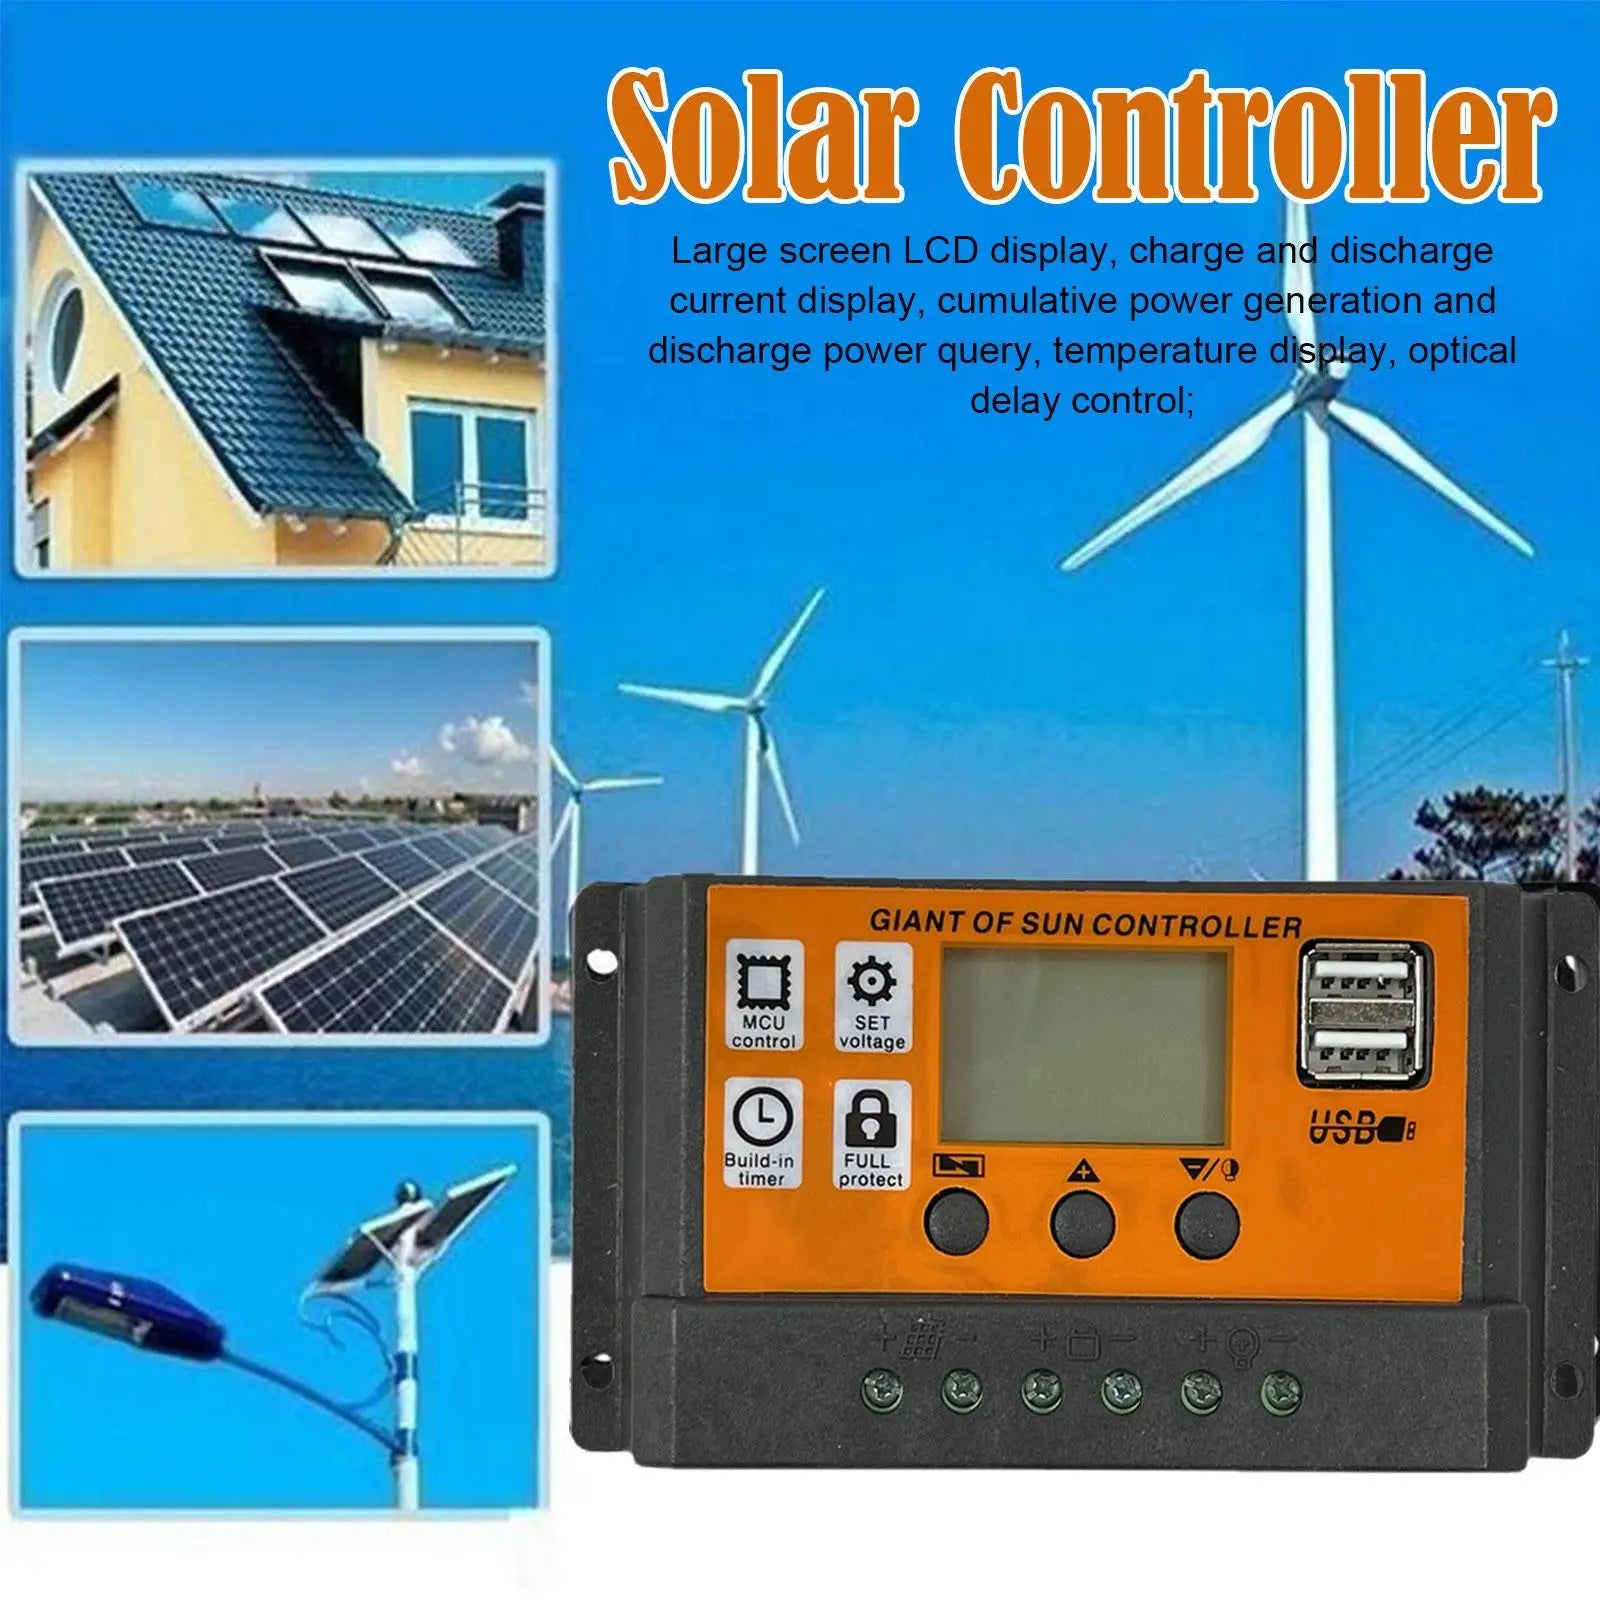 MPPT Solar Charge Controller, MPPT solar controller with LCD display shows current, power, and temp, plus built-in protection against over/under voltage, current, and temperature.